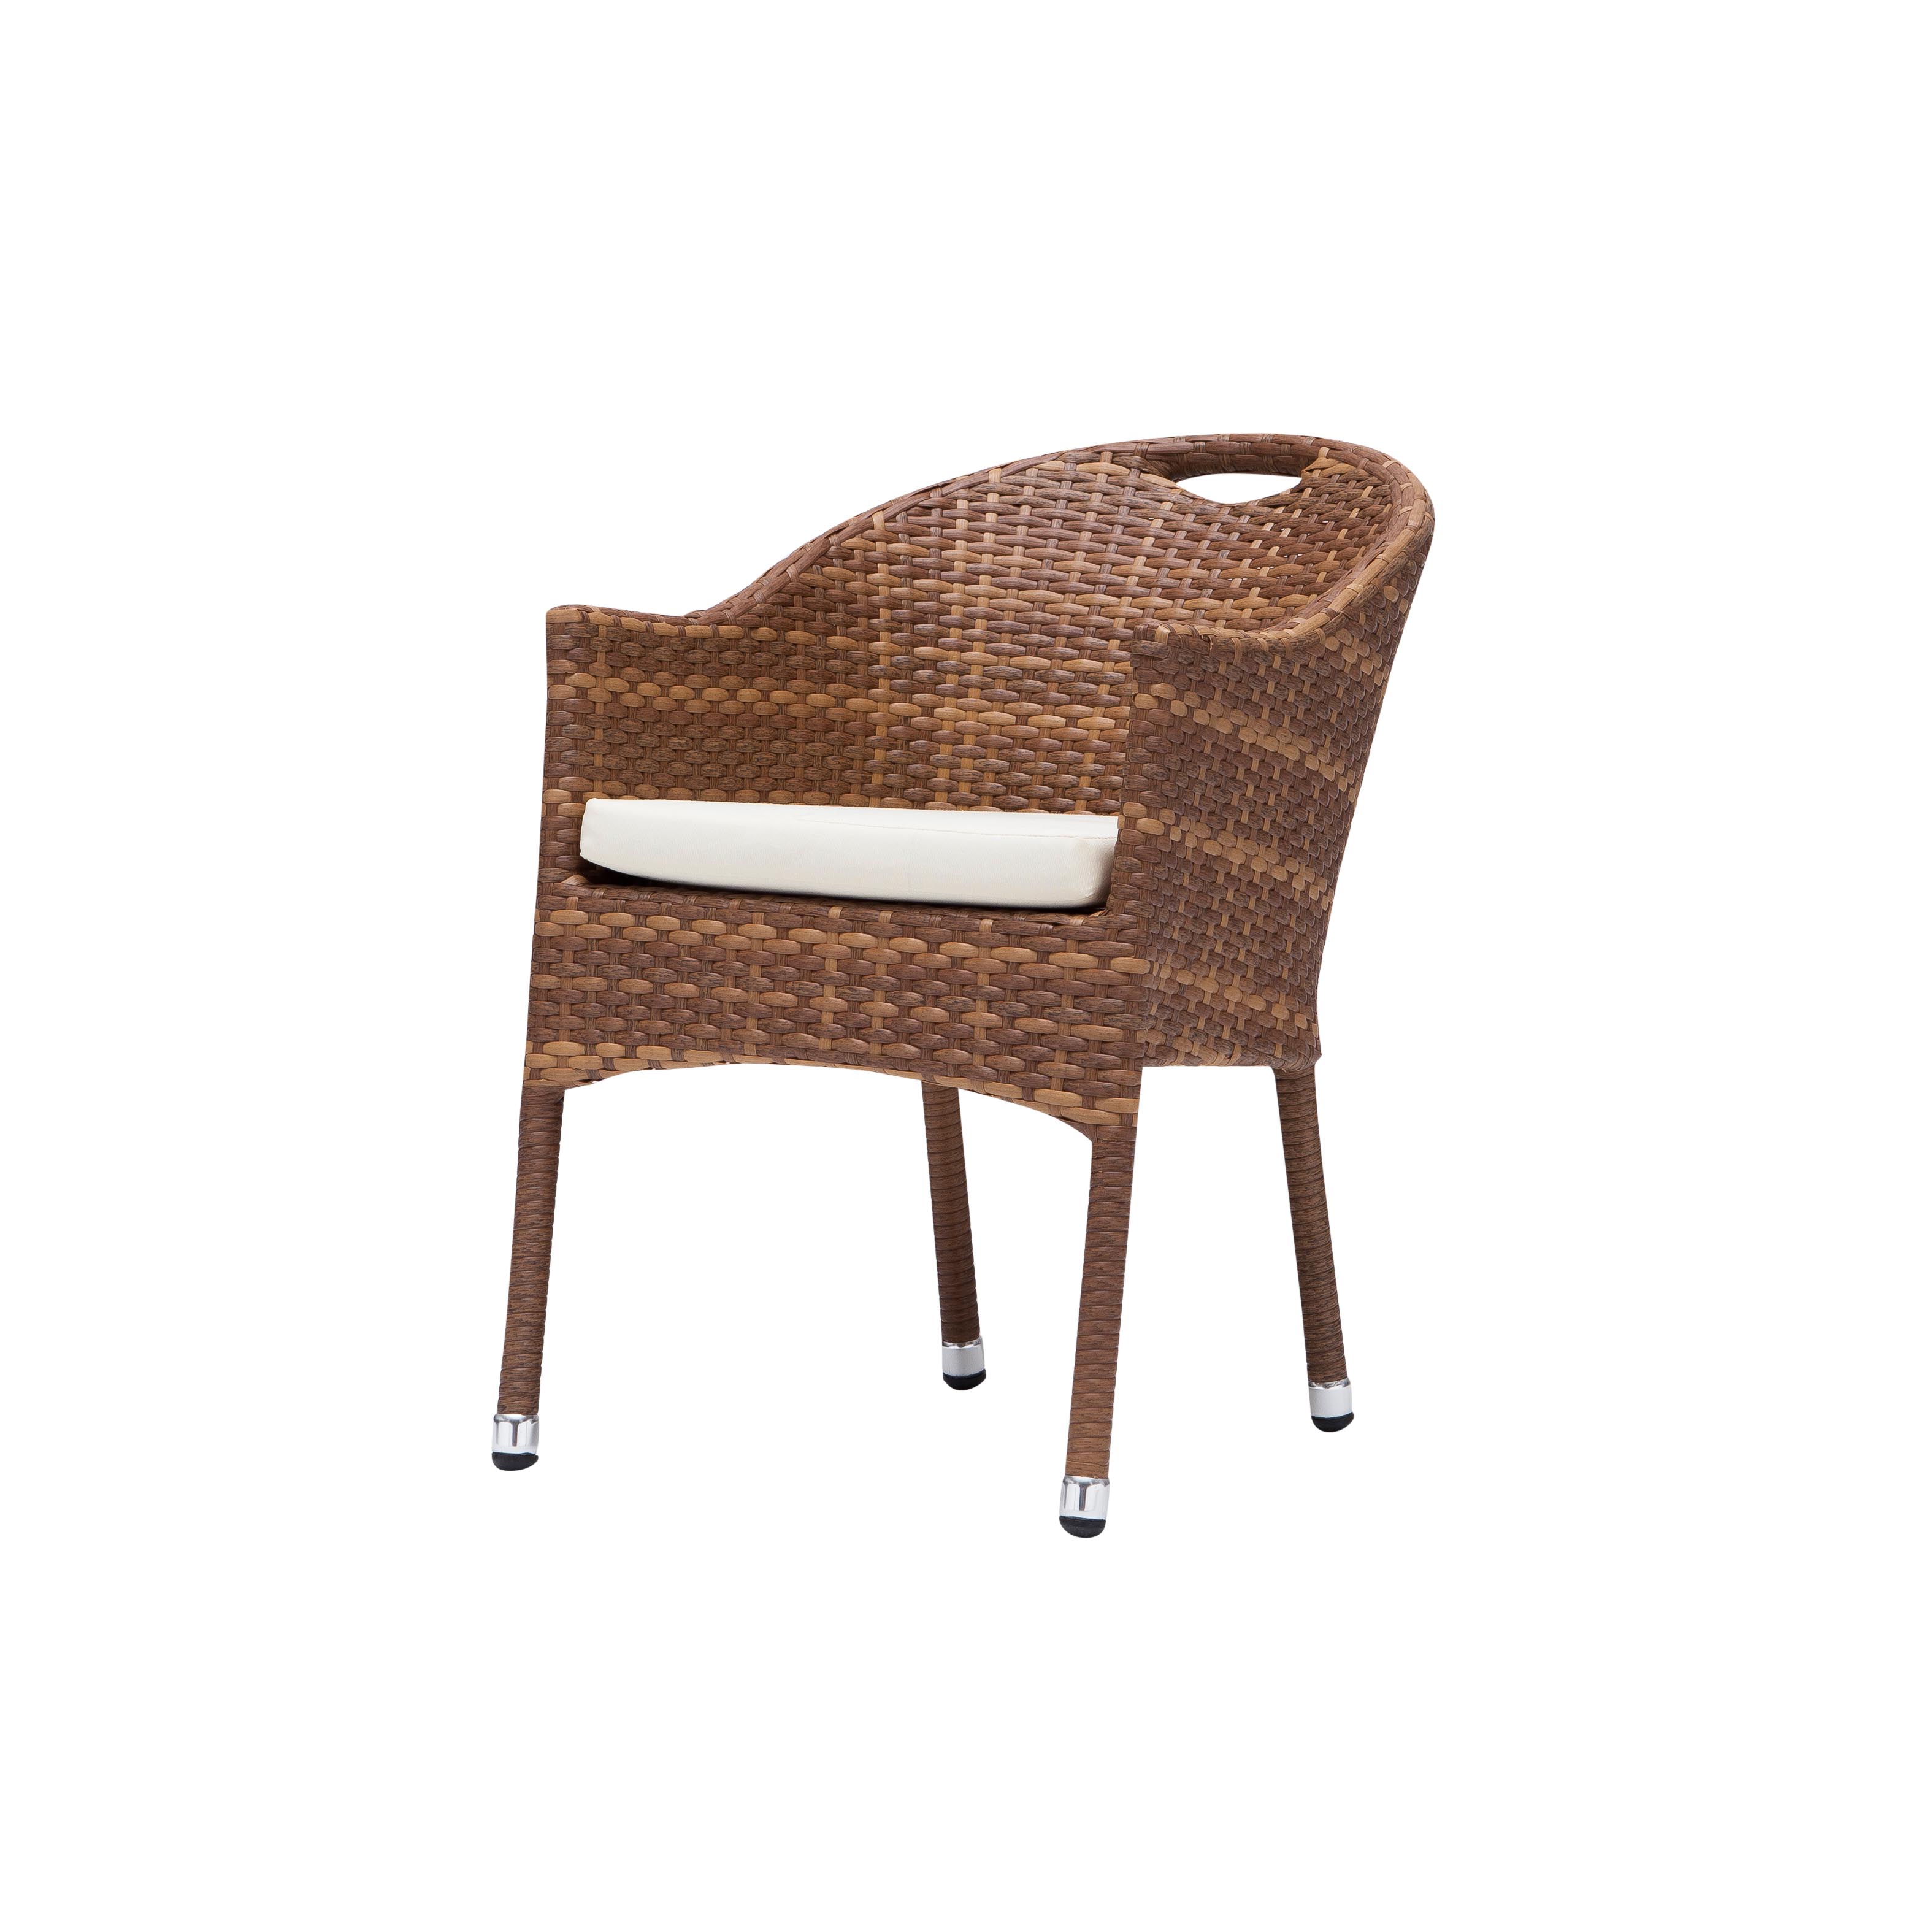 Angus dining chair S1